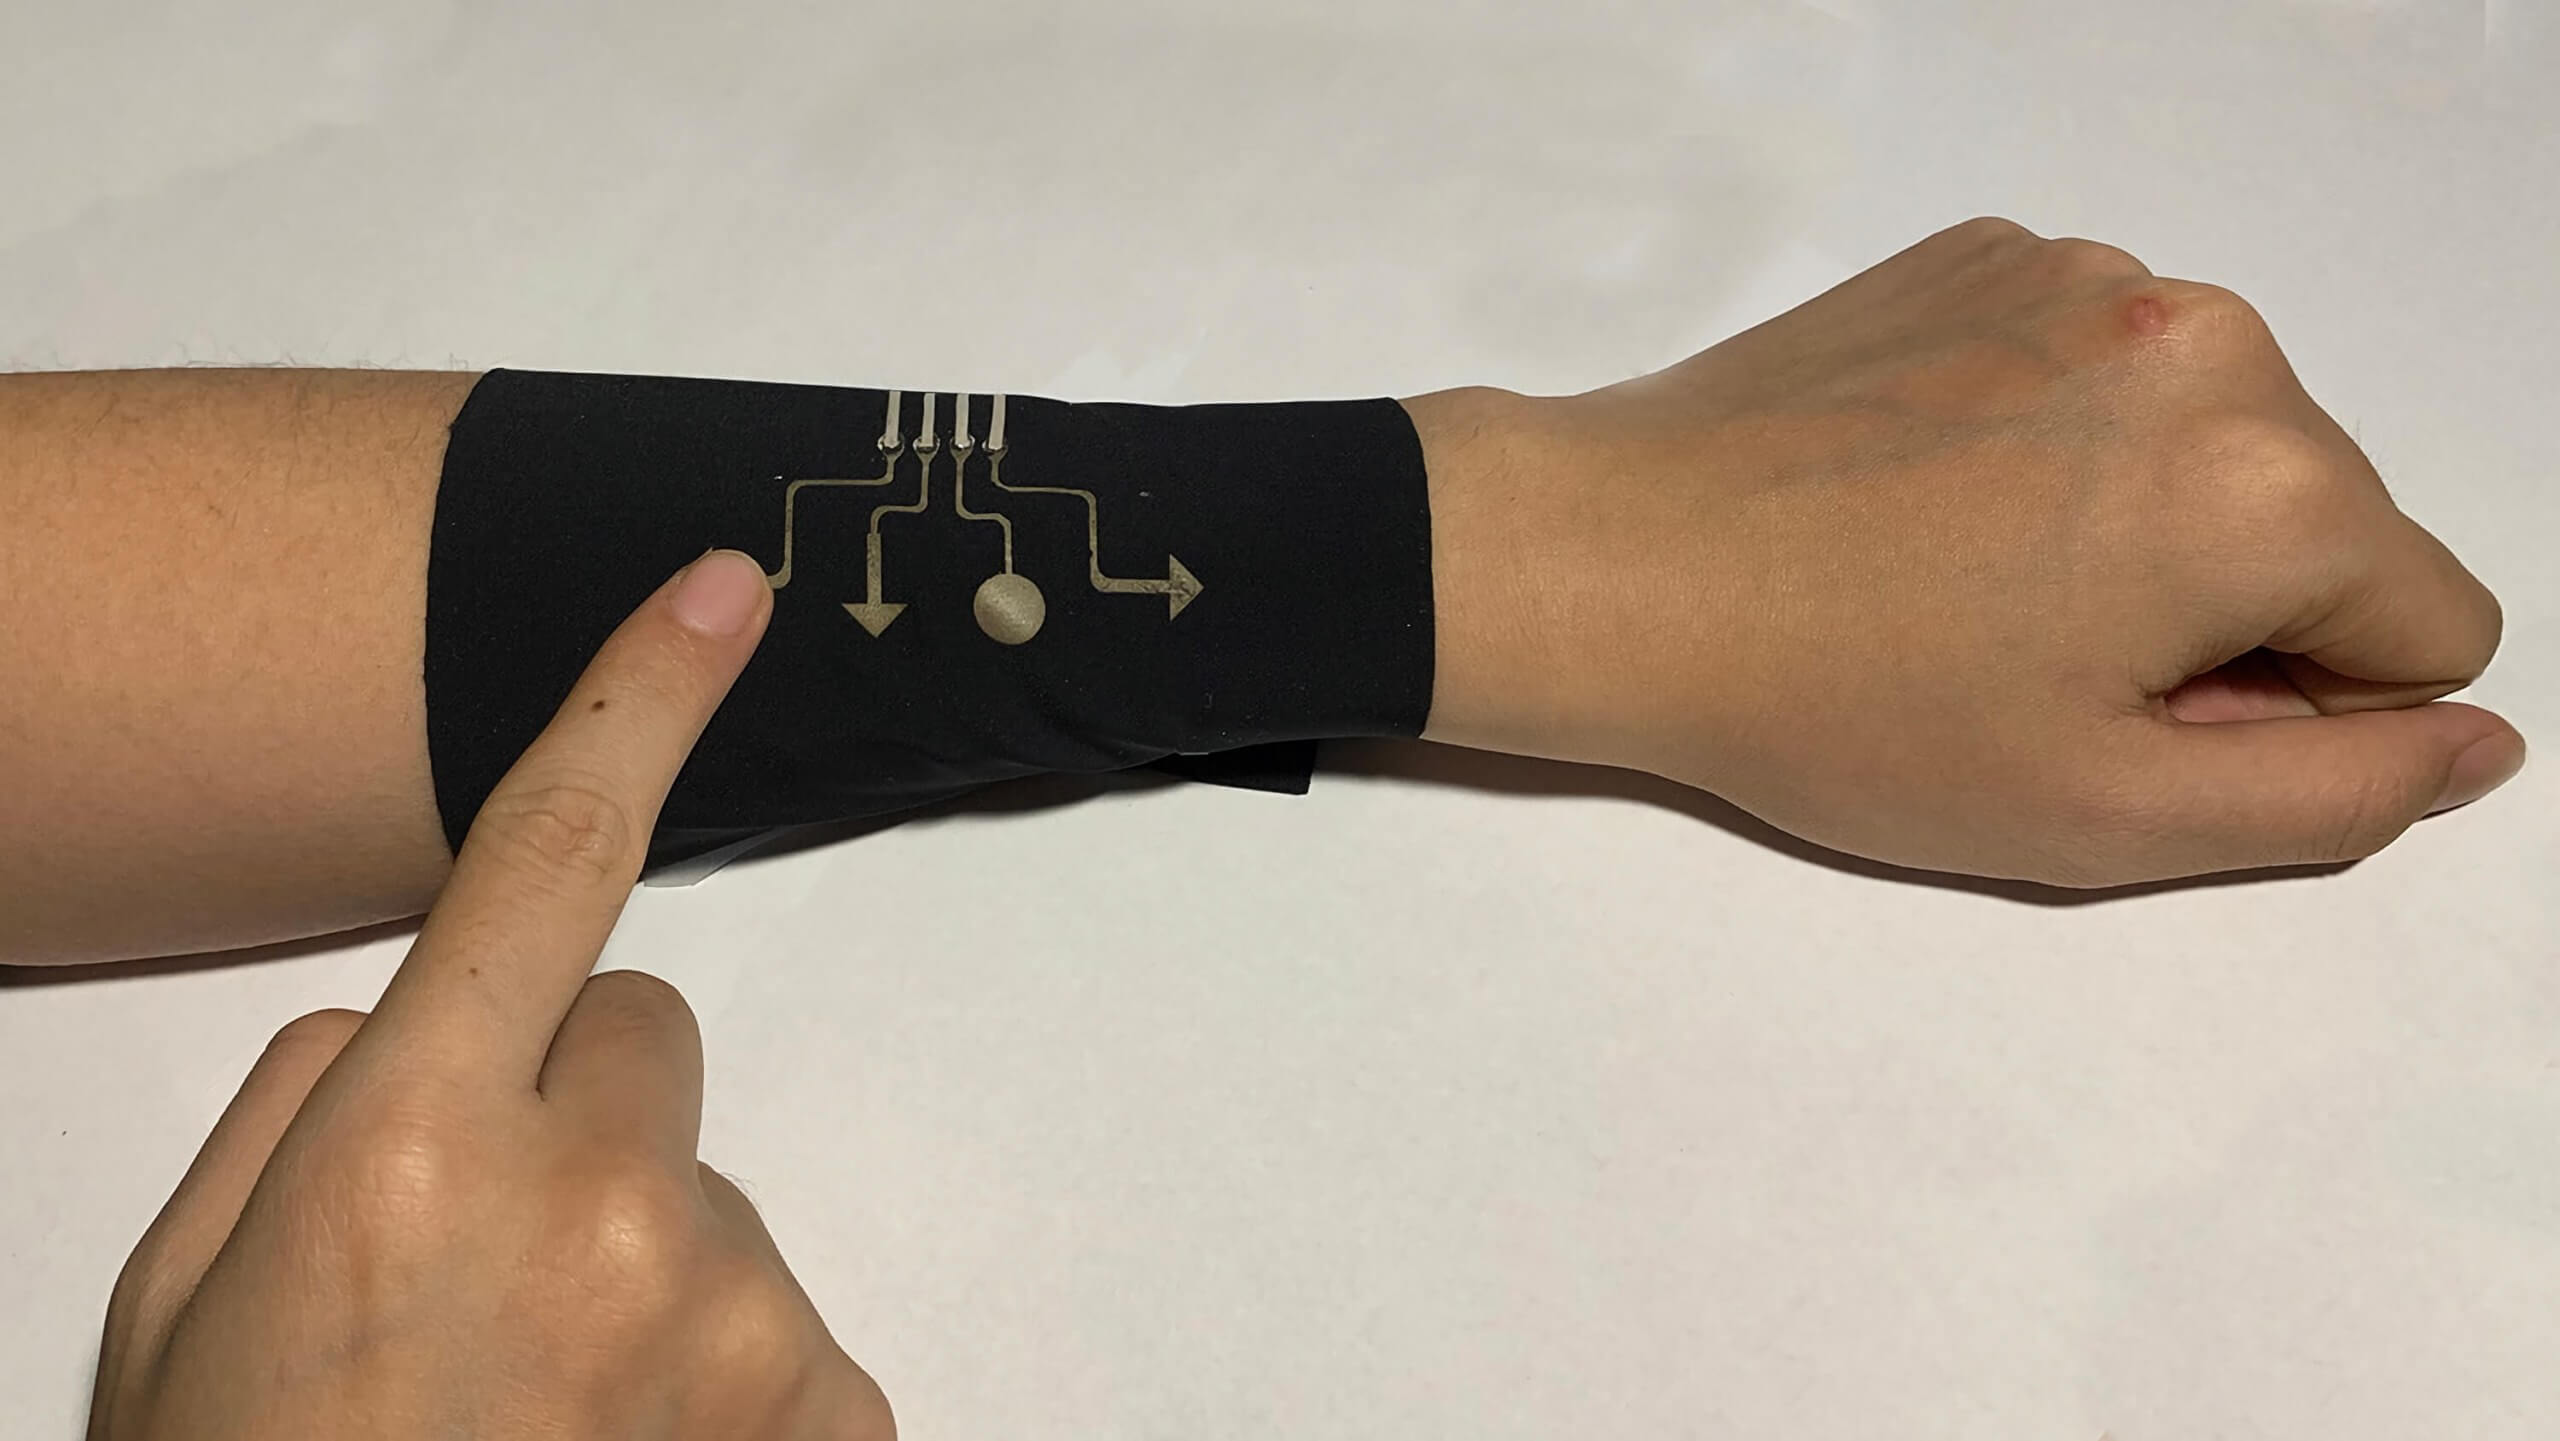 Researchers create a wrist-worn game controller from breathable electro-fabric